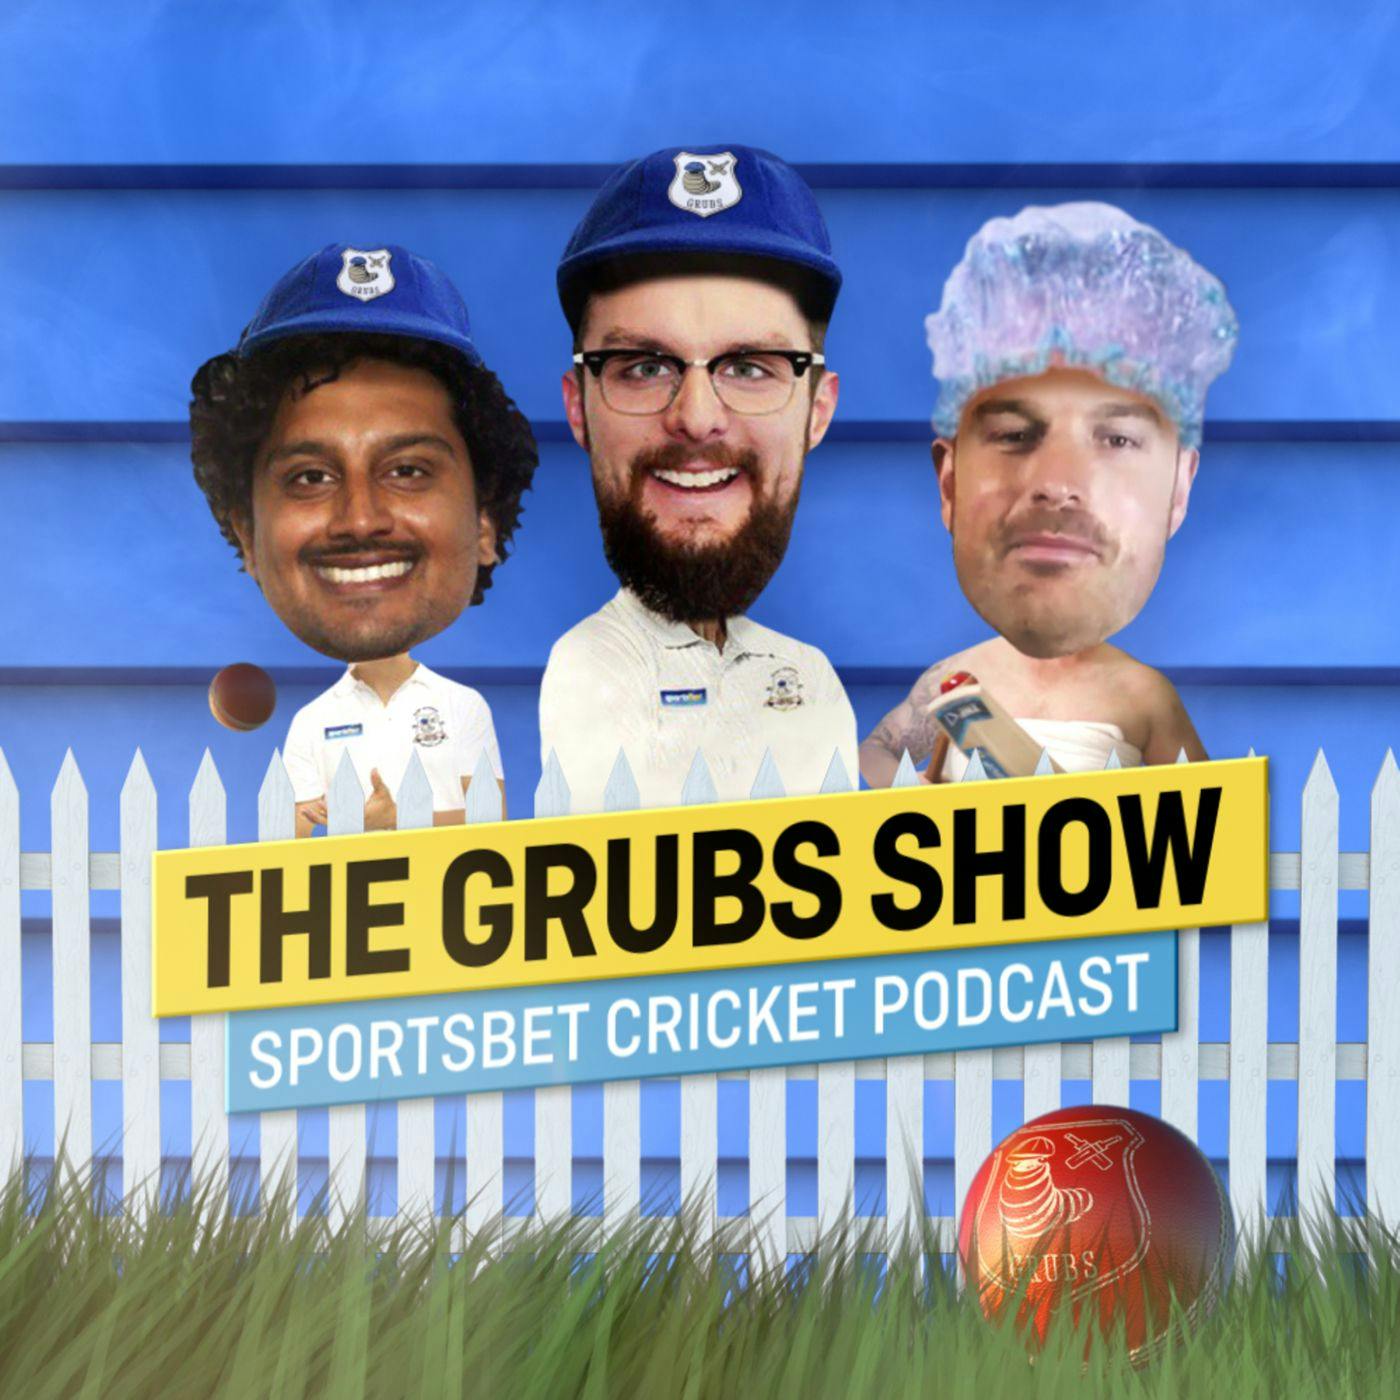 Three Slips No Cover - The Grubs review The Test (Part 3)